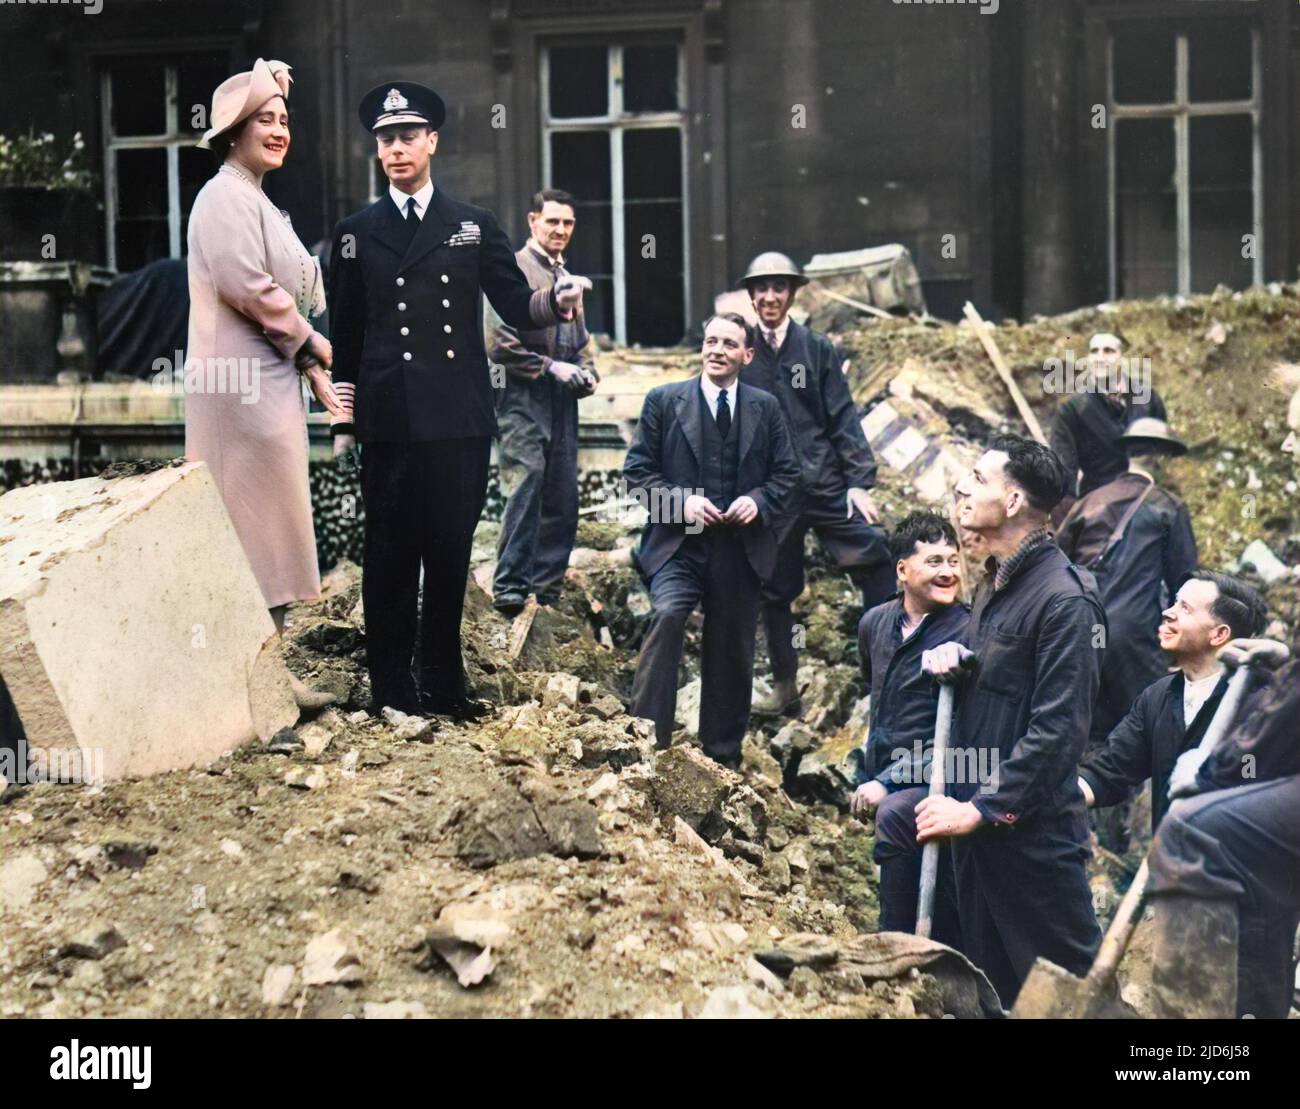 King George VI and Queen Elizabeth pictured among the rubble at Buckingham Palace following German air raids during the Blitz, September 1940.  The Palace suffered bomb damage on 8 September and on the morning of the 13th, the King and Queen were in residence when a bomb was dropped into the Quadrangle.  They escaped unhurt but one workman was killed. Colourised version of: 10435803       Date: 1940 Stock Photo